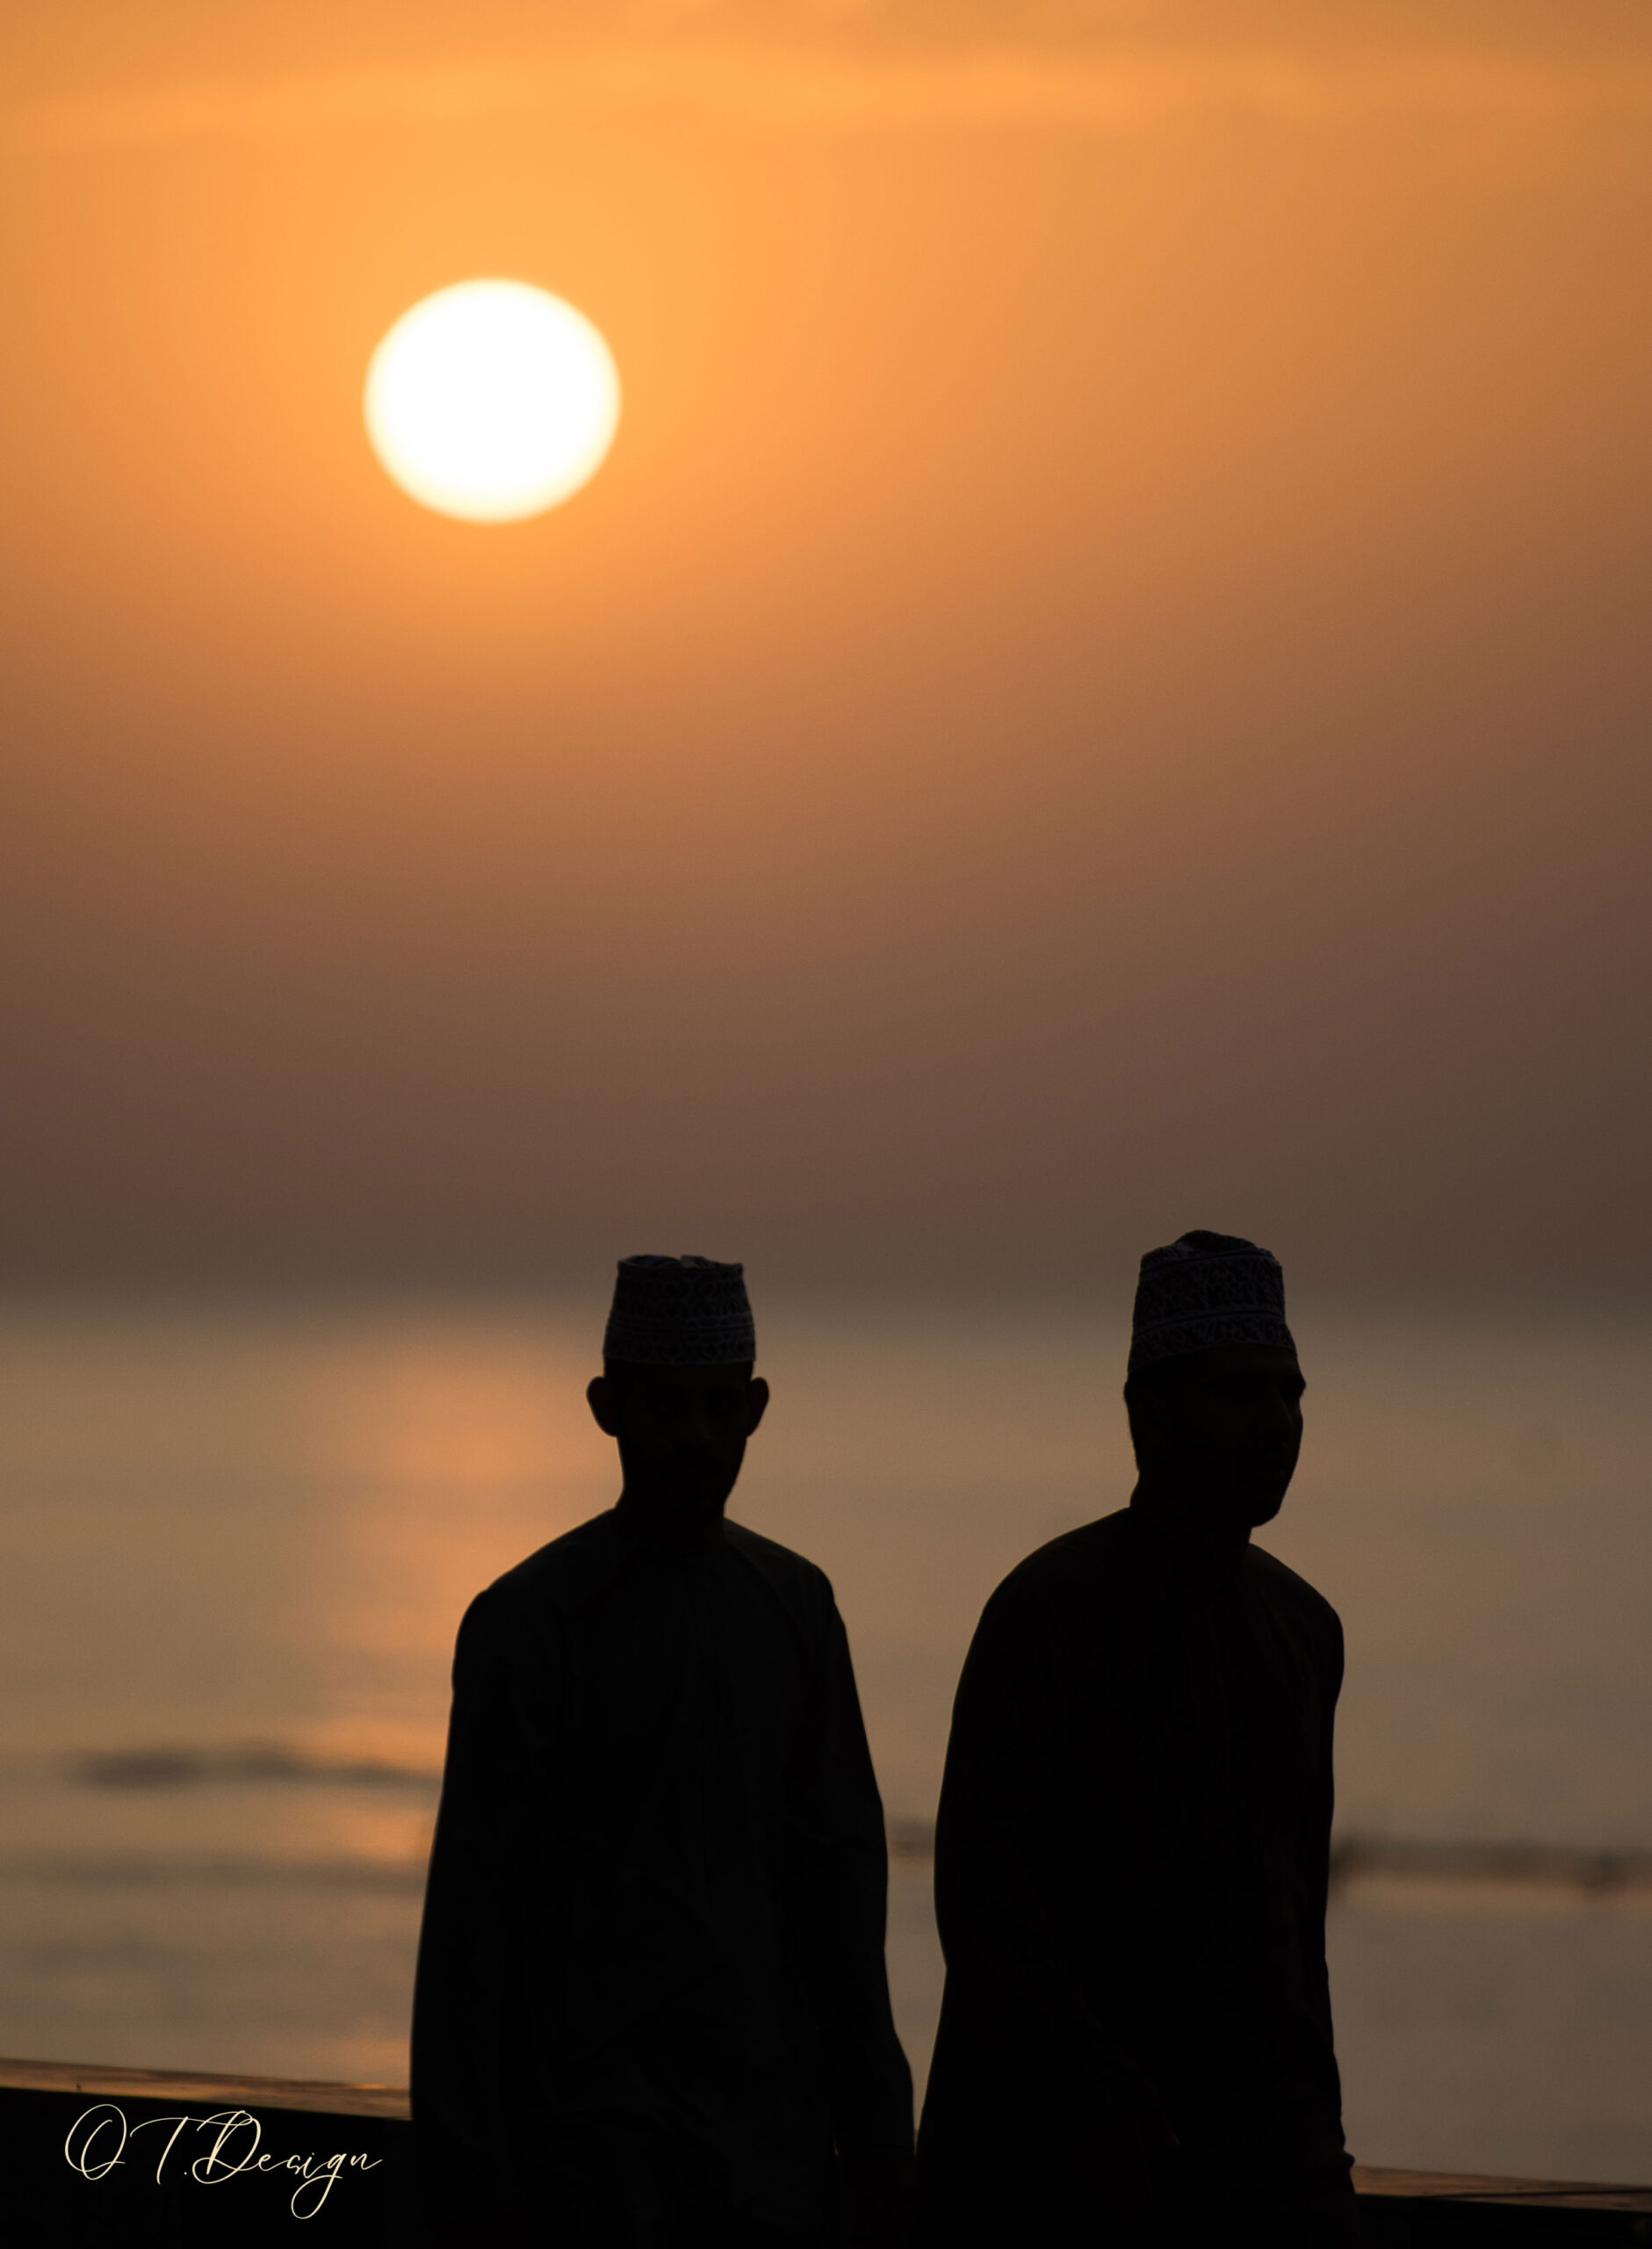 Silhouettes of two men walking on the beach at sunset in Muscat, Oman